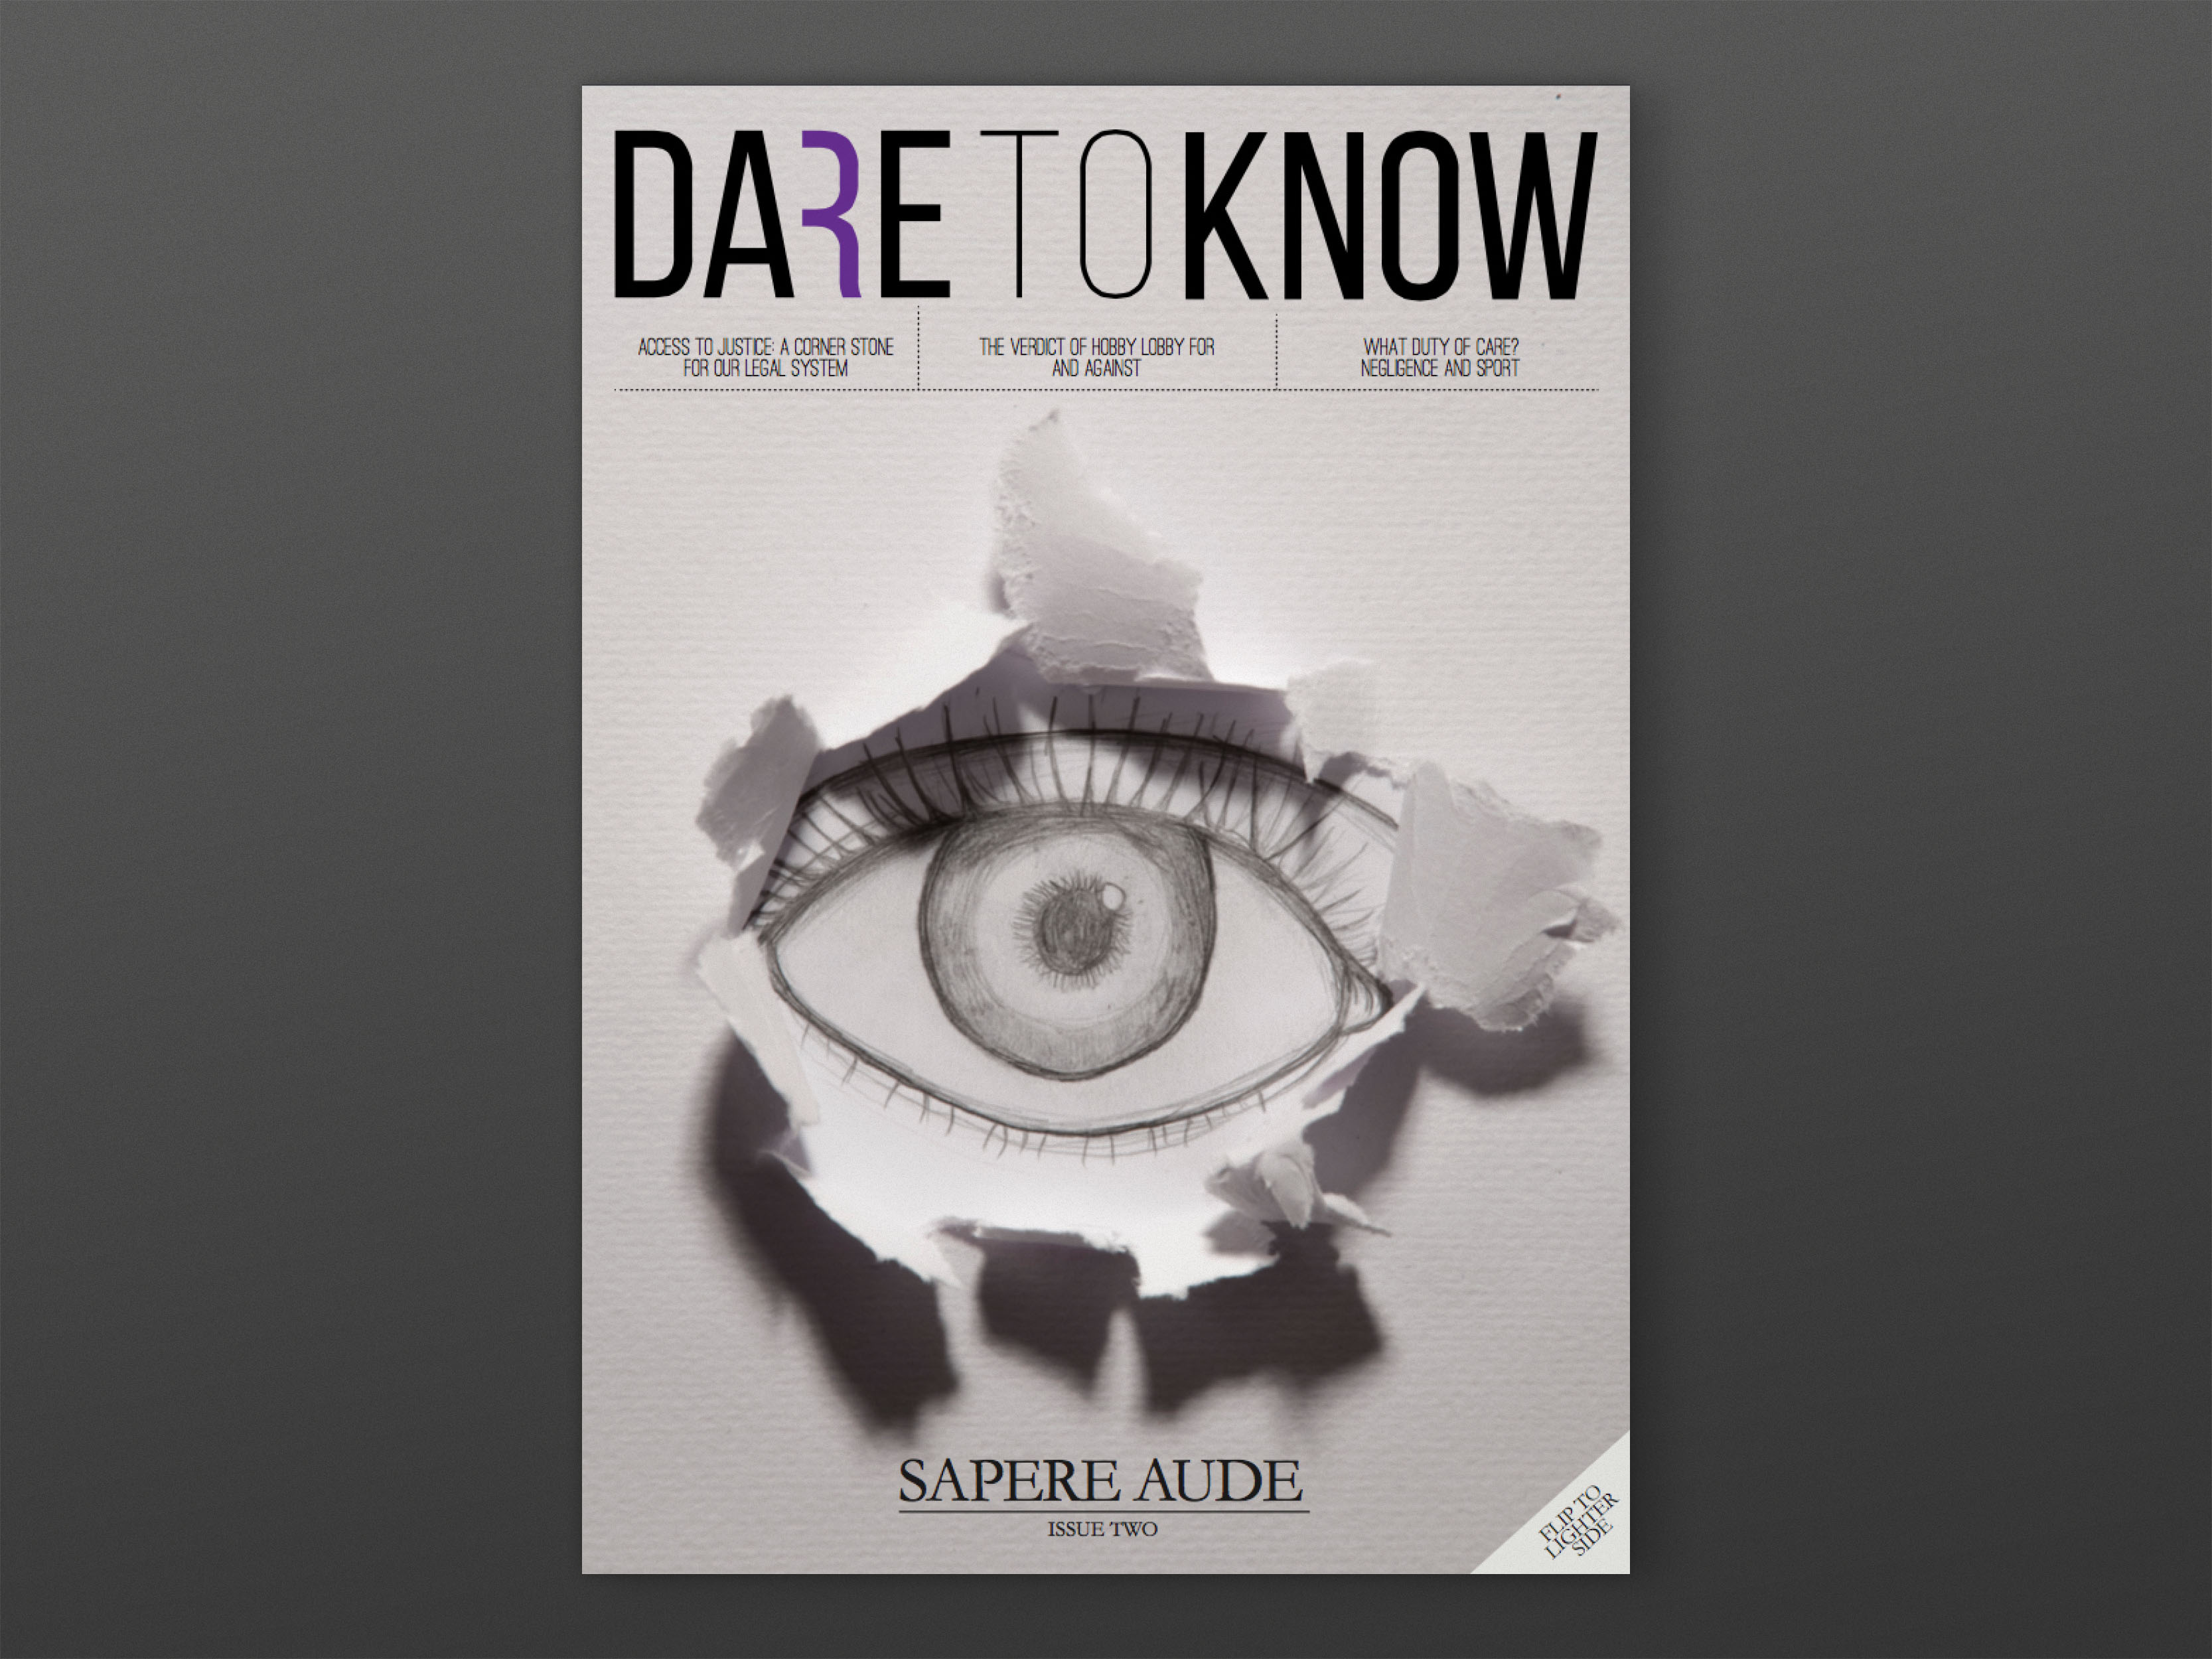 Dare to Know